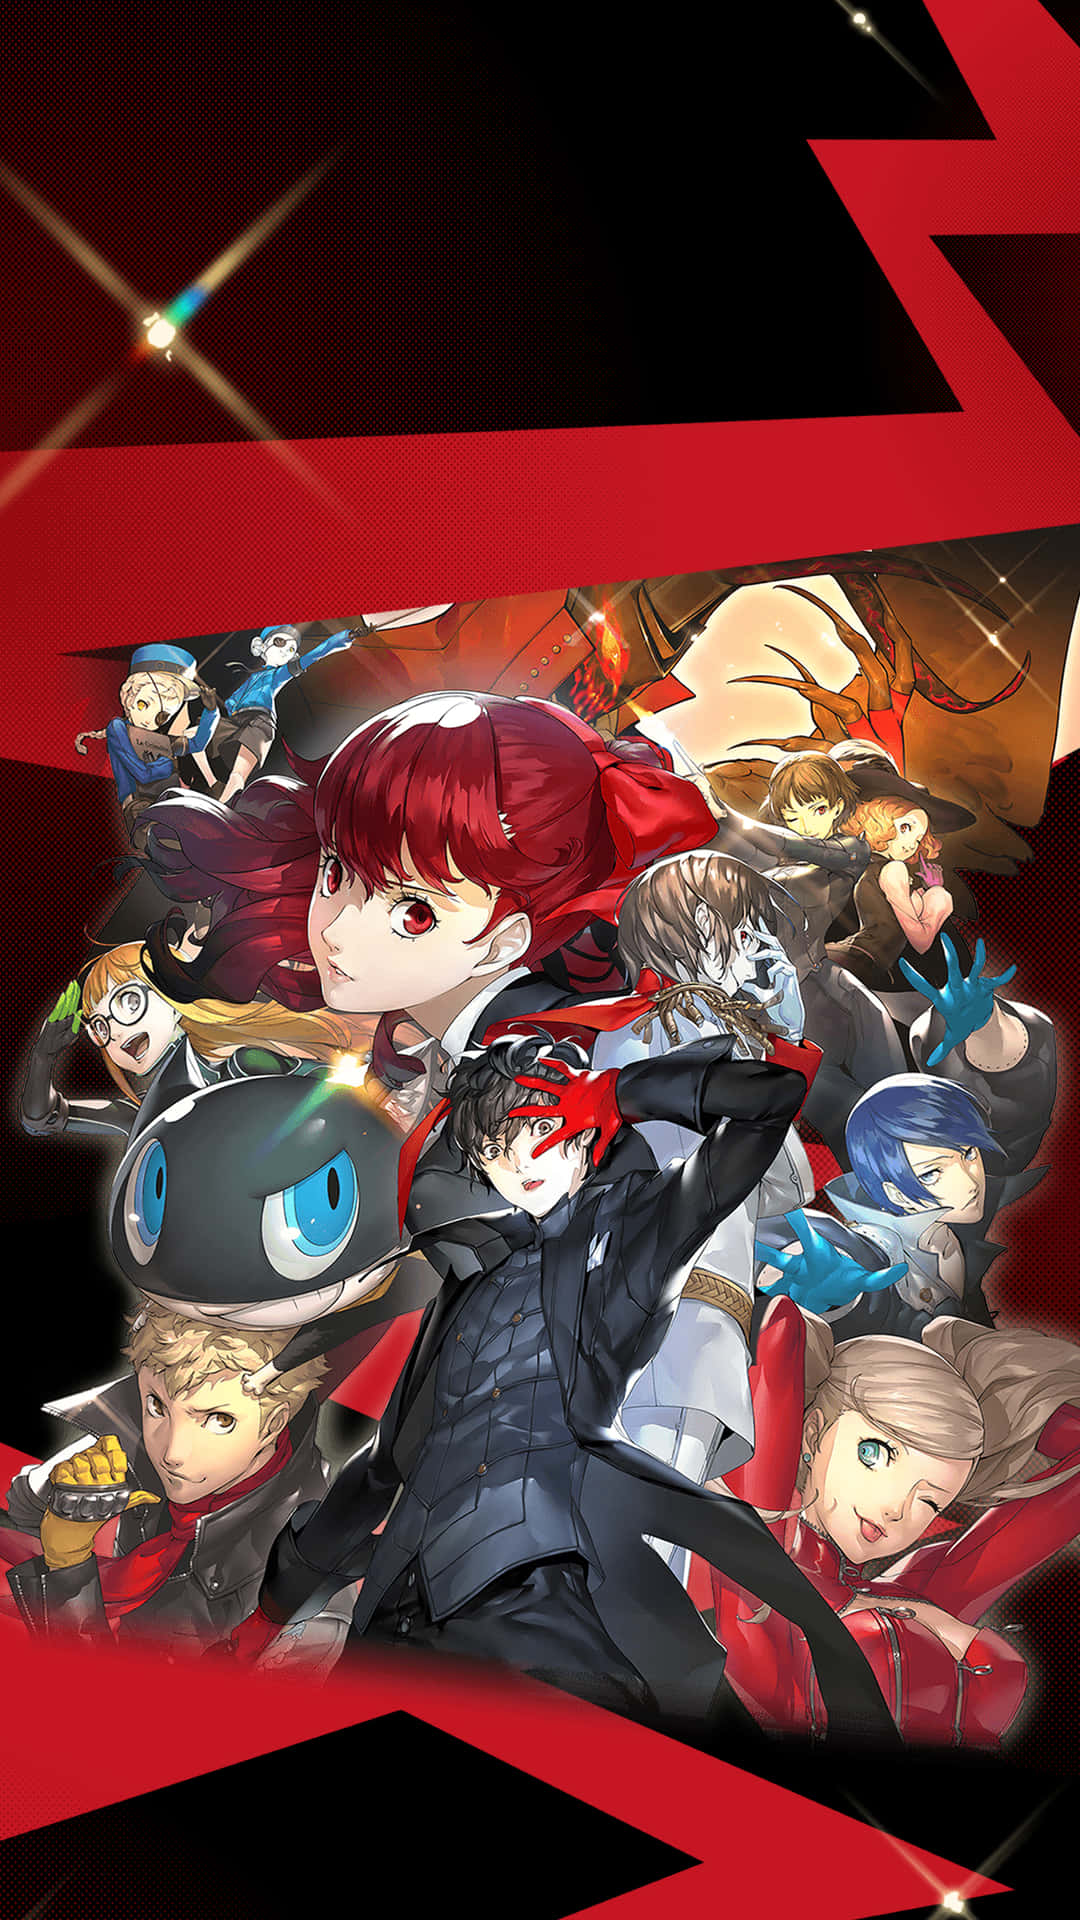 "Unlock the Power of Persona 5 on your iPhone!" Wallpaper